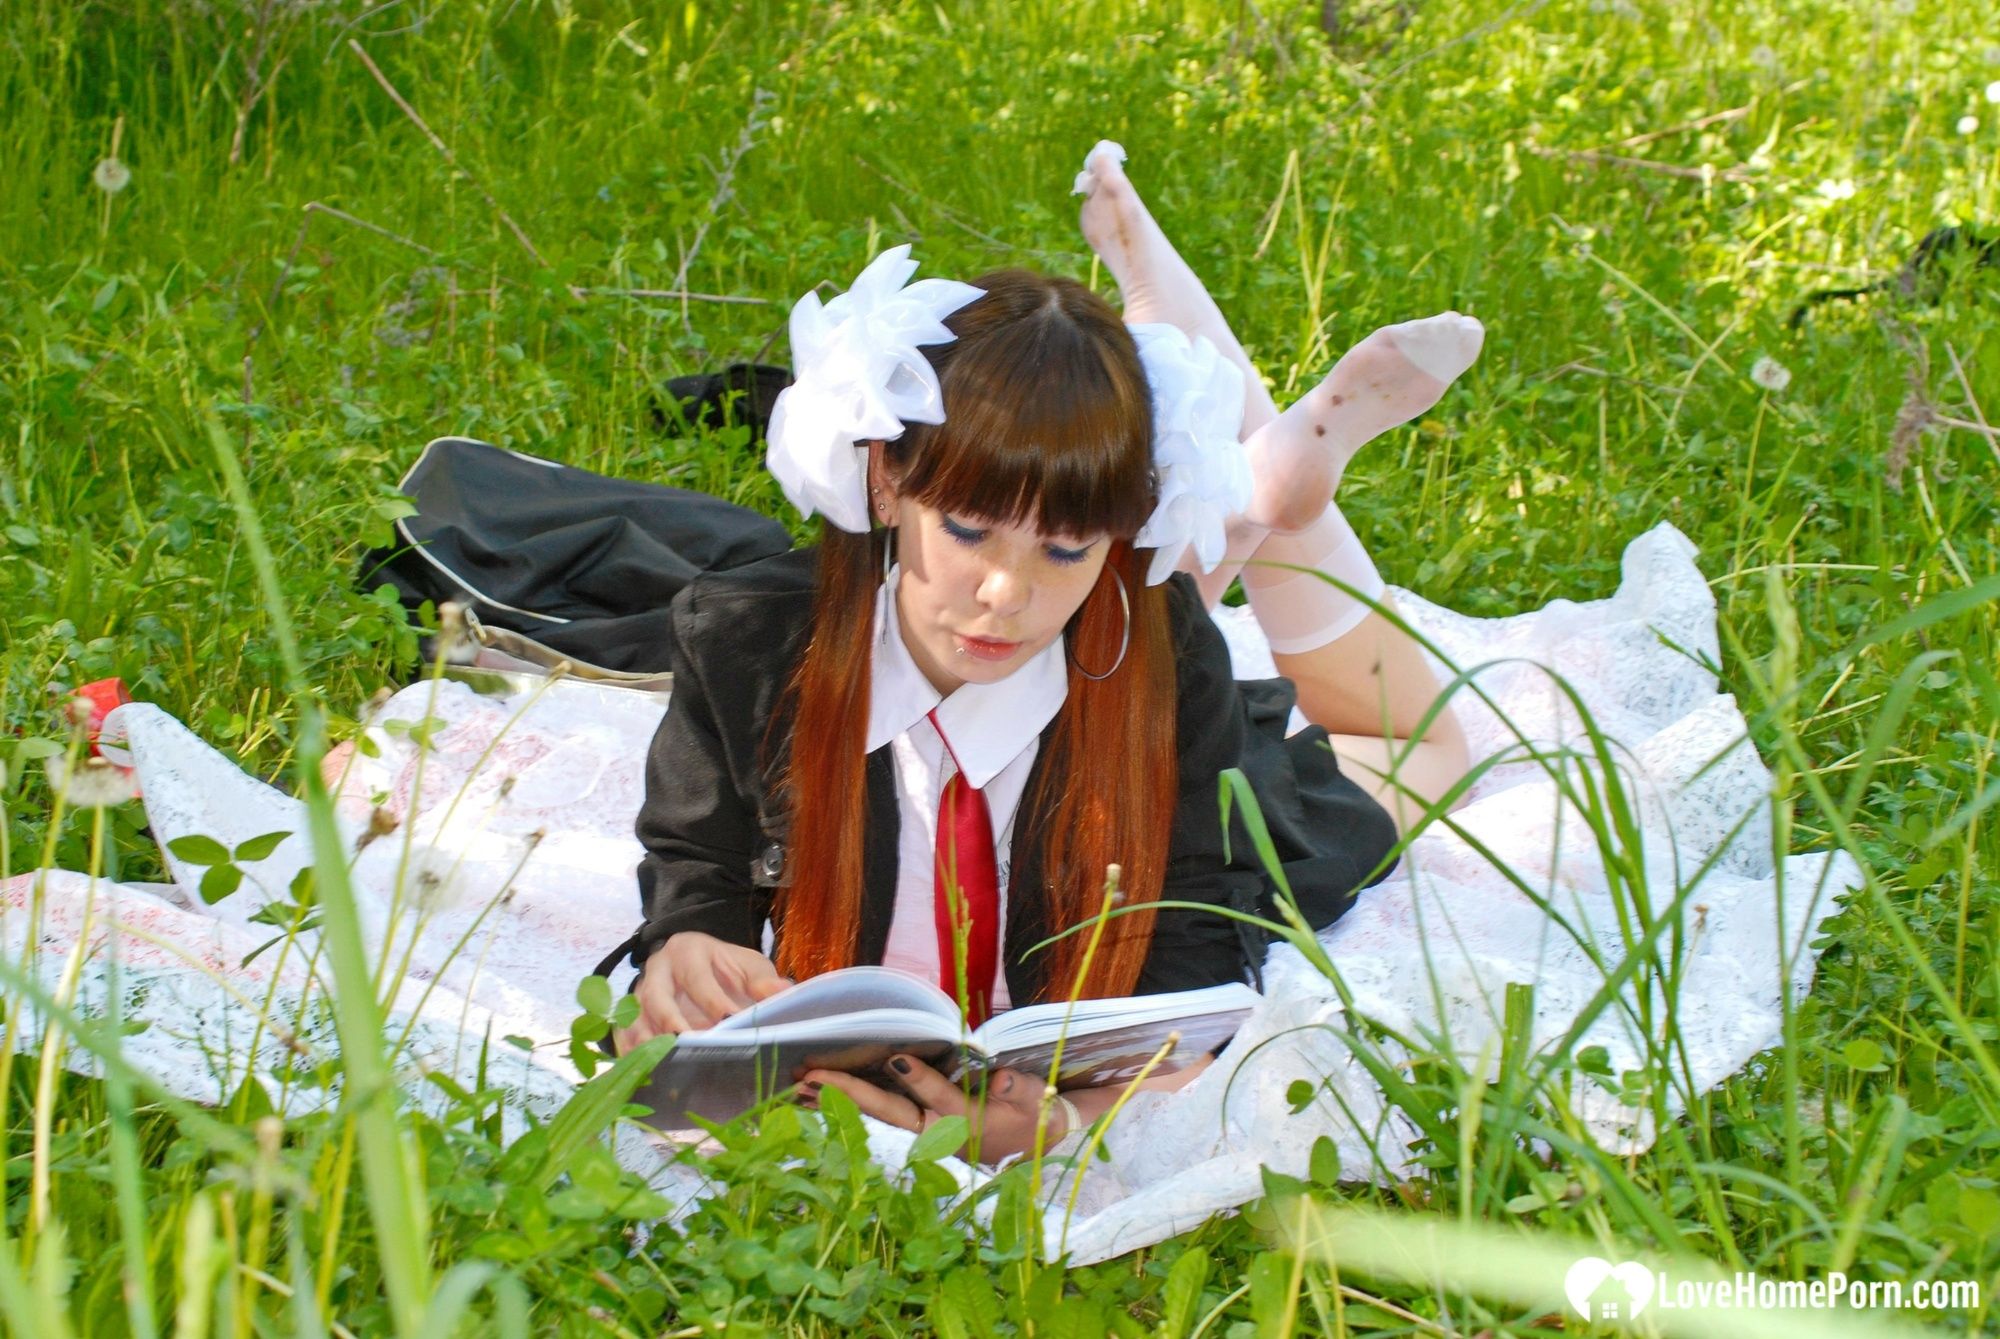 Schoolgirl turns a picnic into a teasing session #25